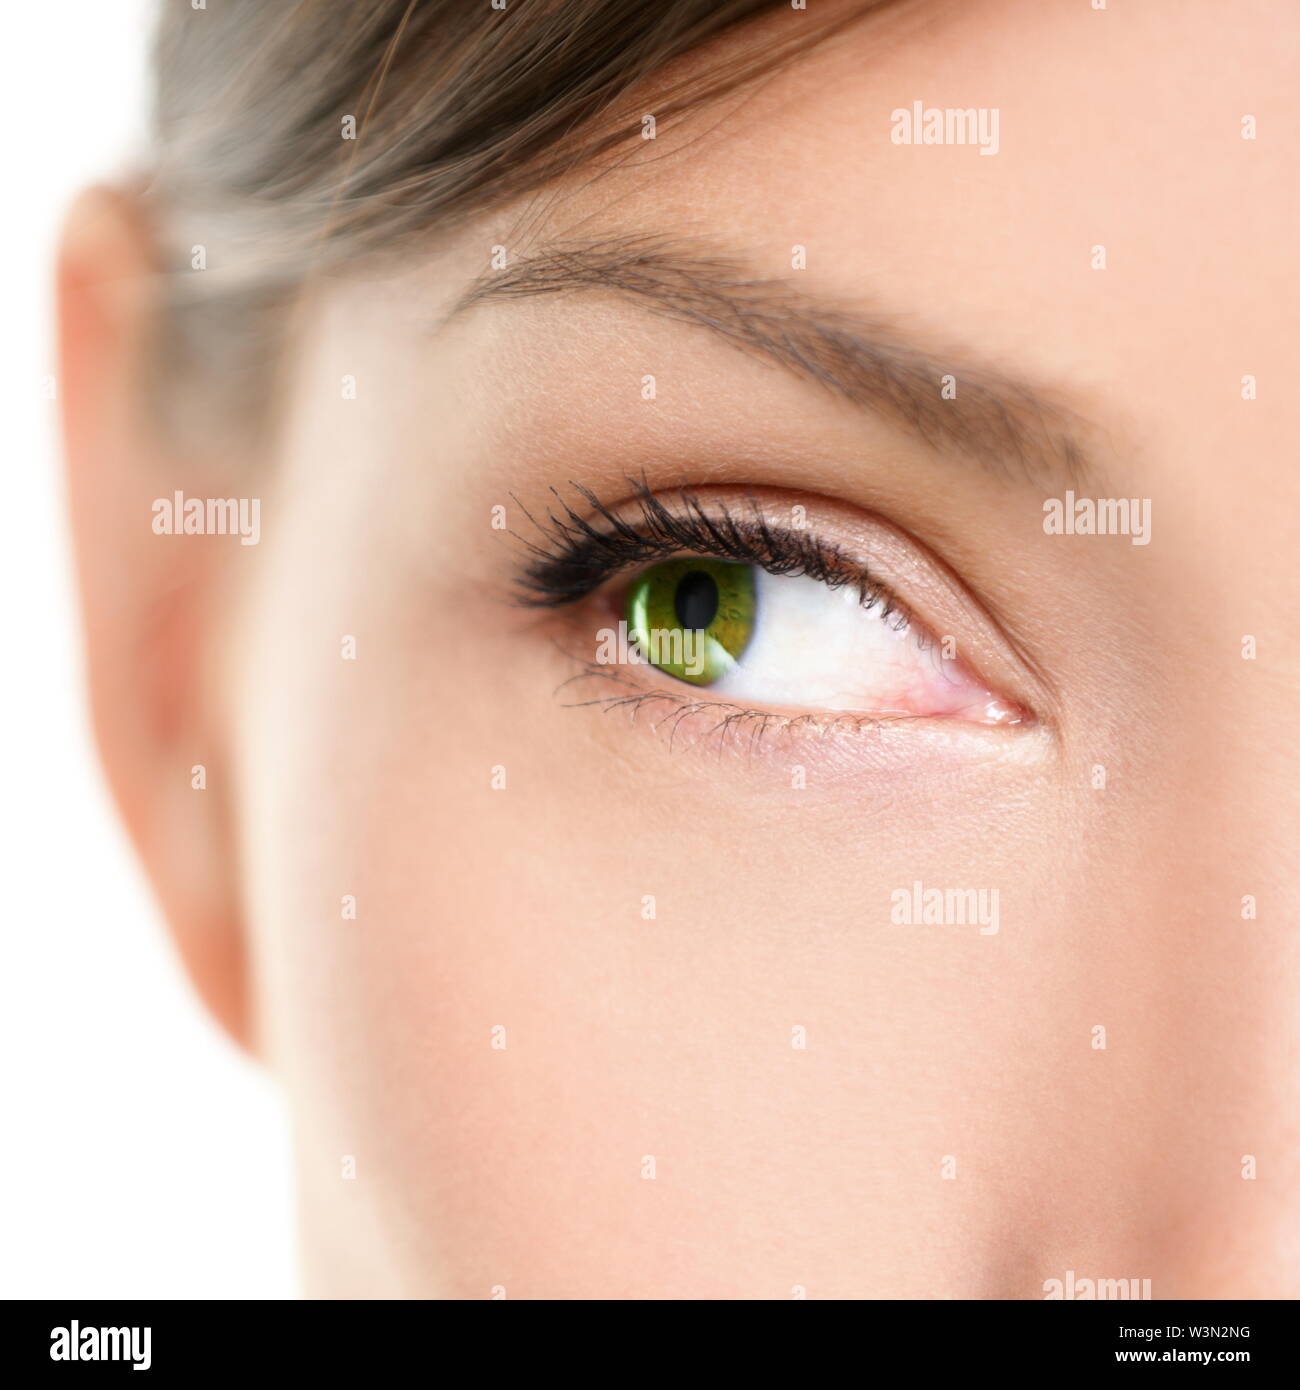 Eye Close-up looking to side. Closeup portrait of female eyee with beautiful green color looking sideways at empty white copy space. Mixed race Asian Caucasian women model. Stock Photo